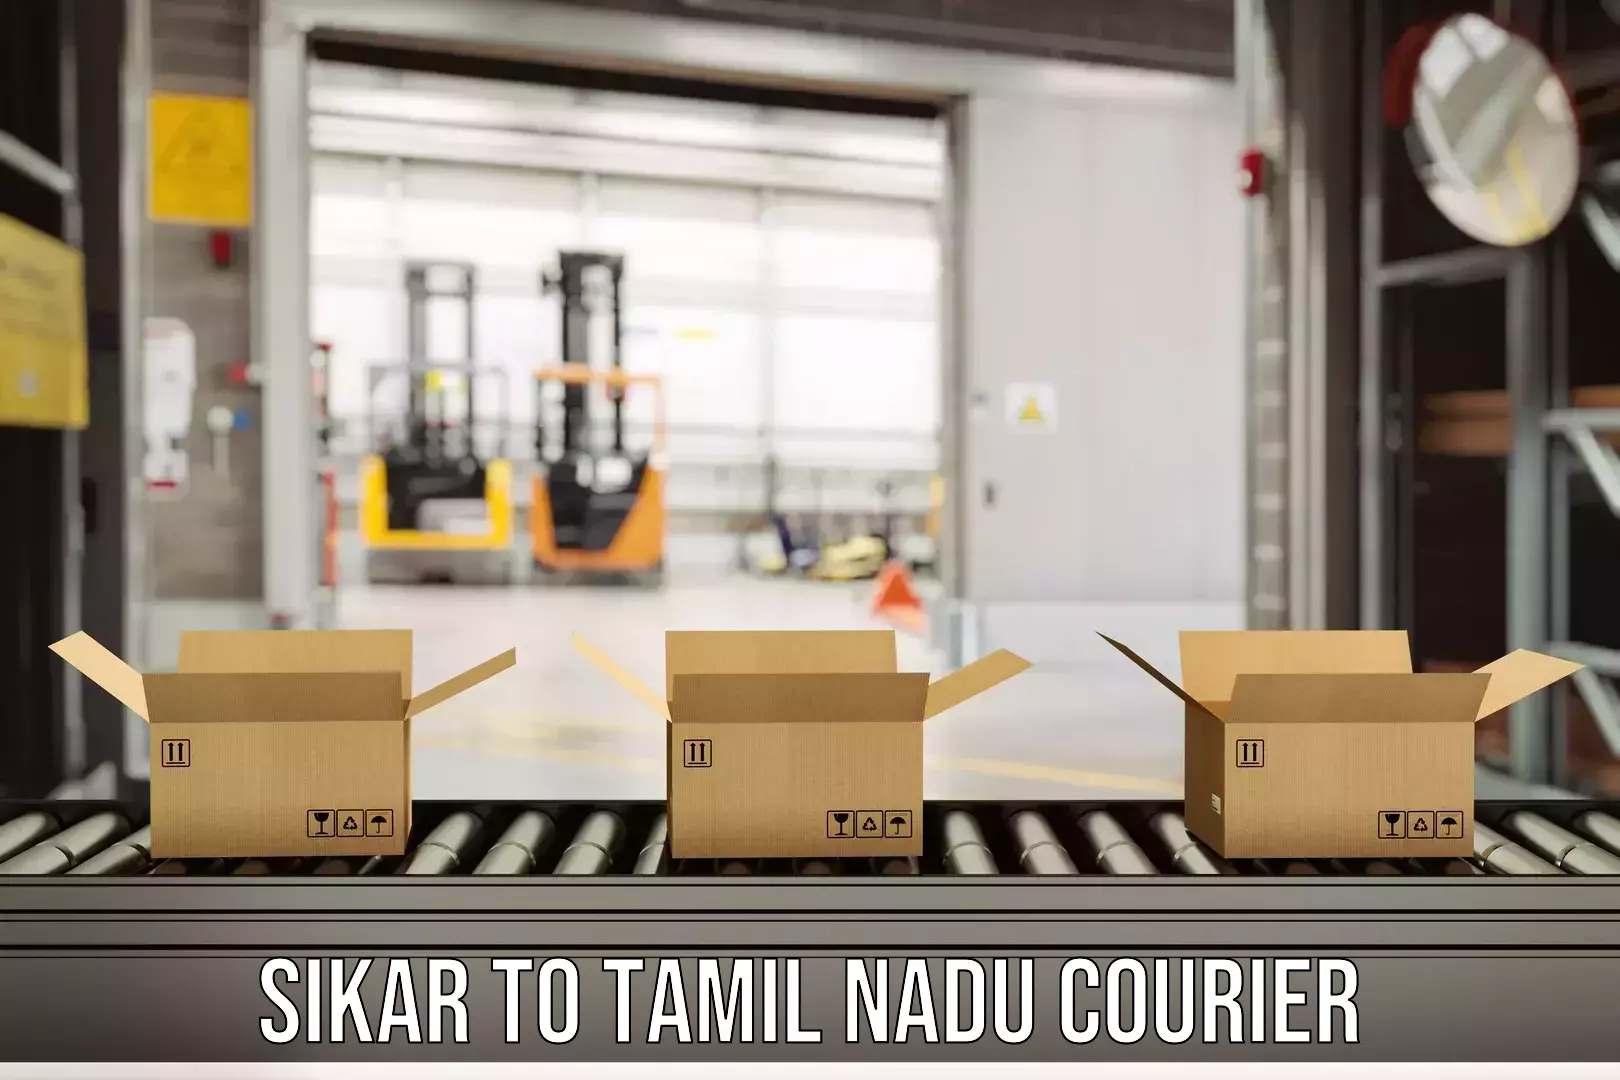 Automated parcel services Sikar to Tirunelveli